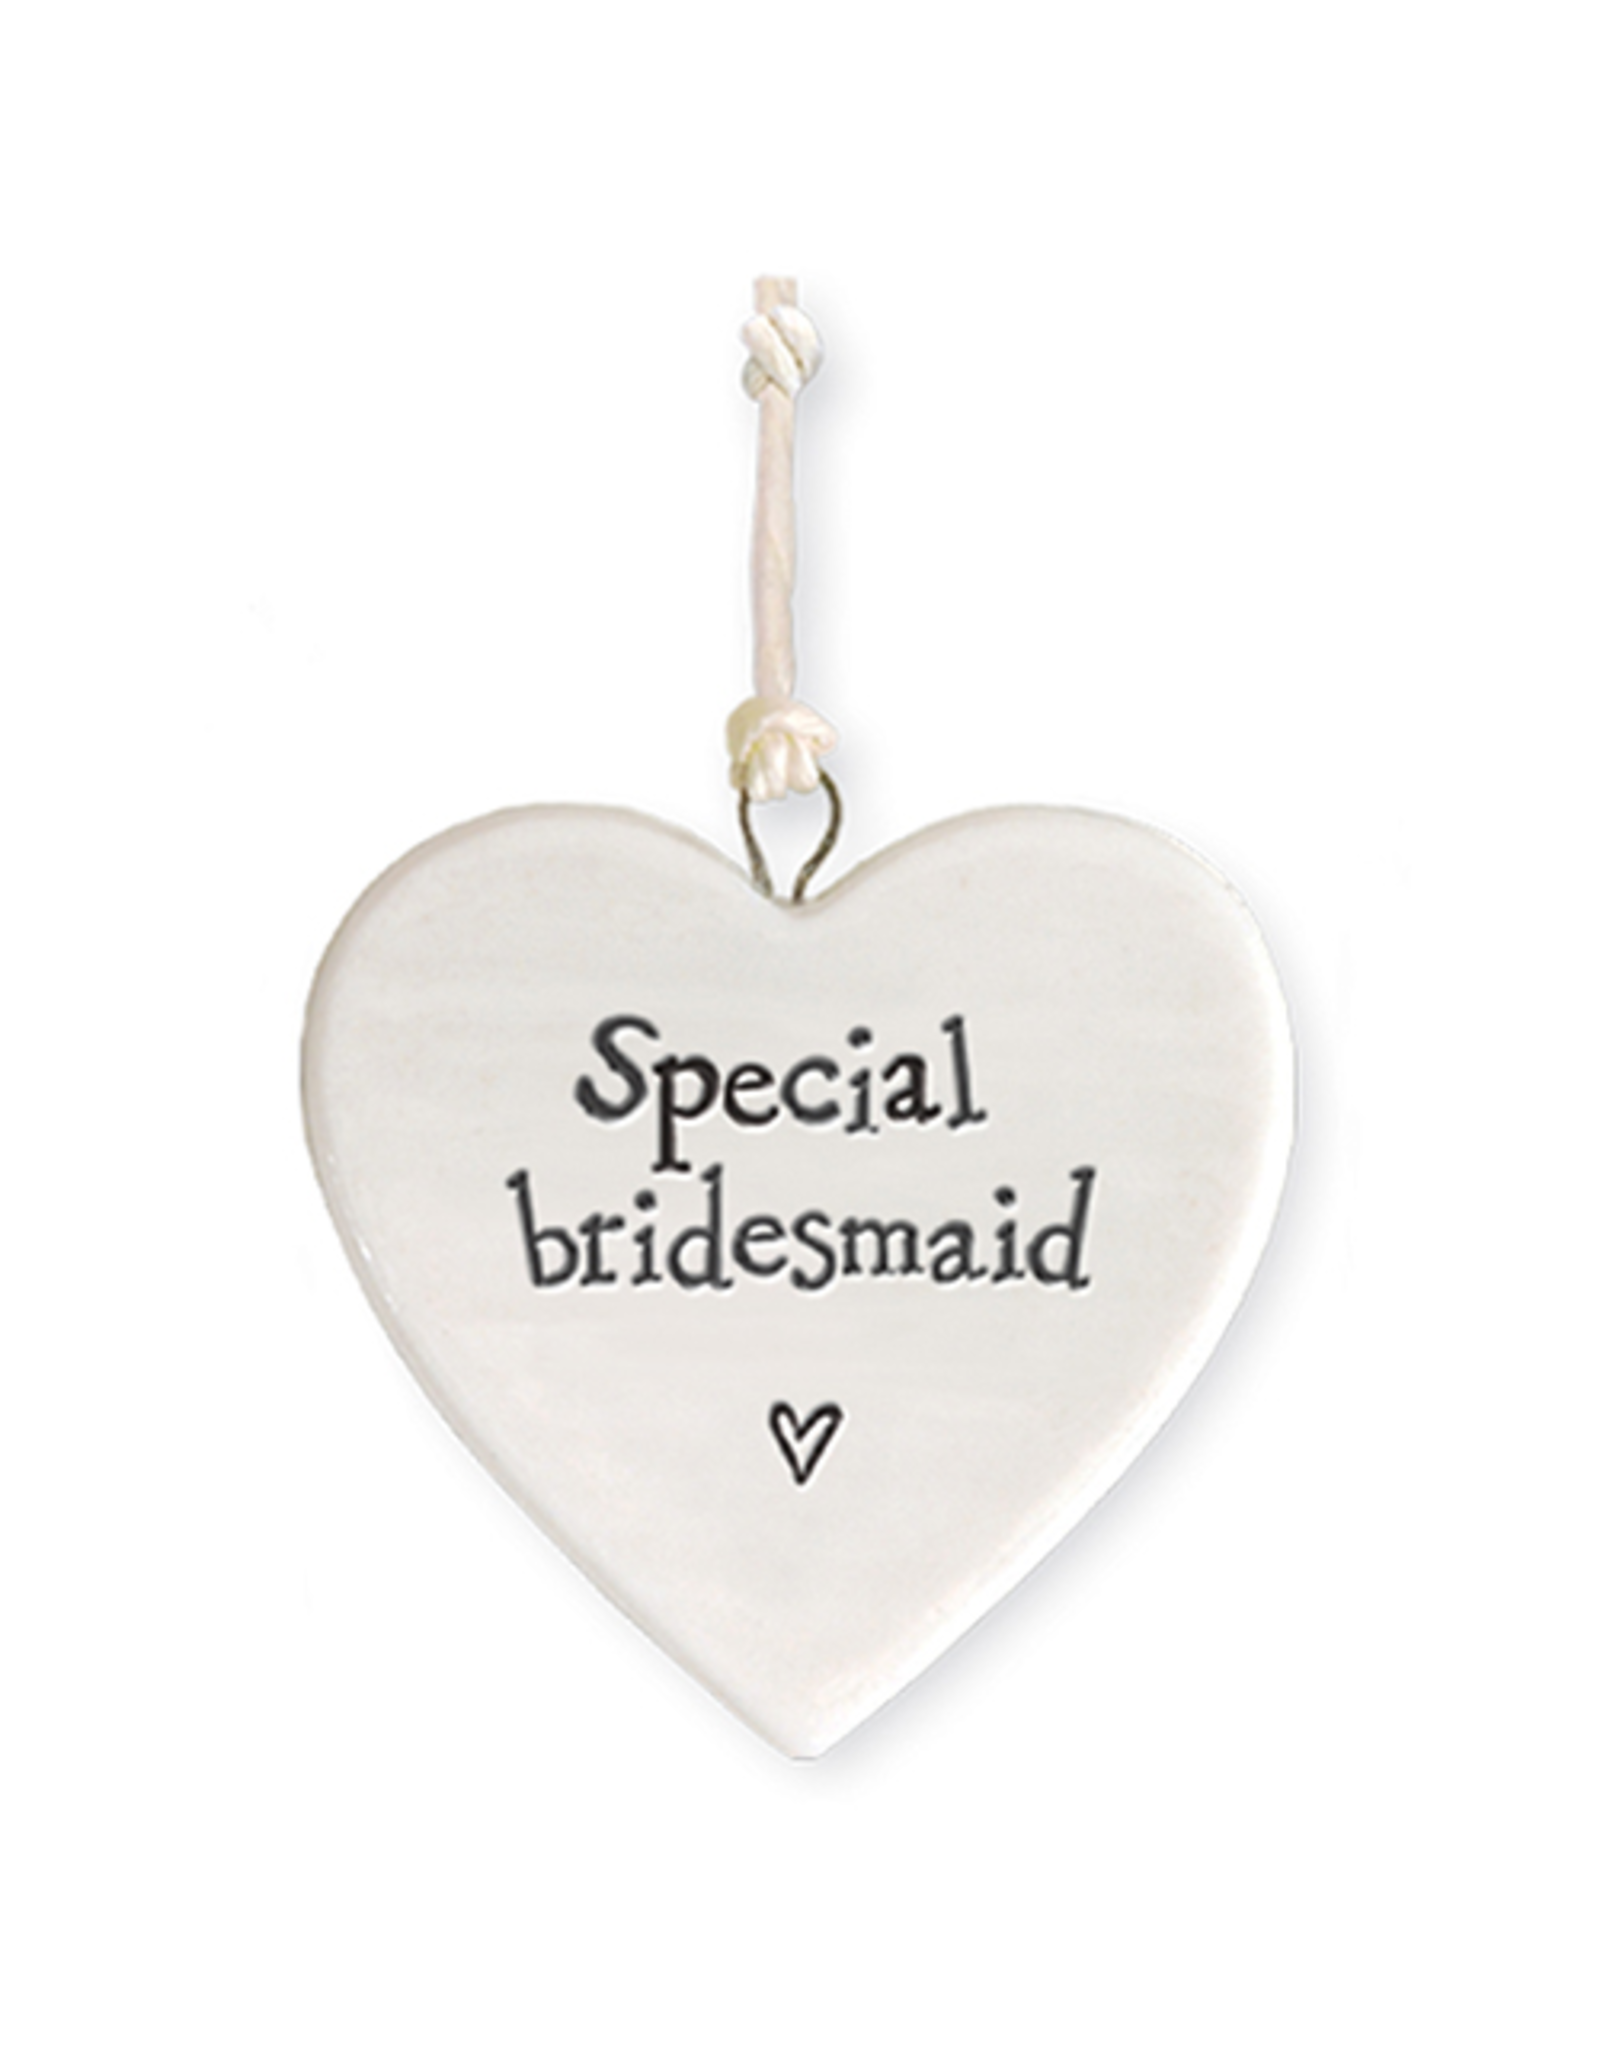 East of India Porcelain Heart Ornament Special Bridesmaid